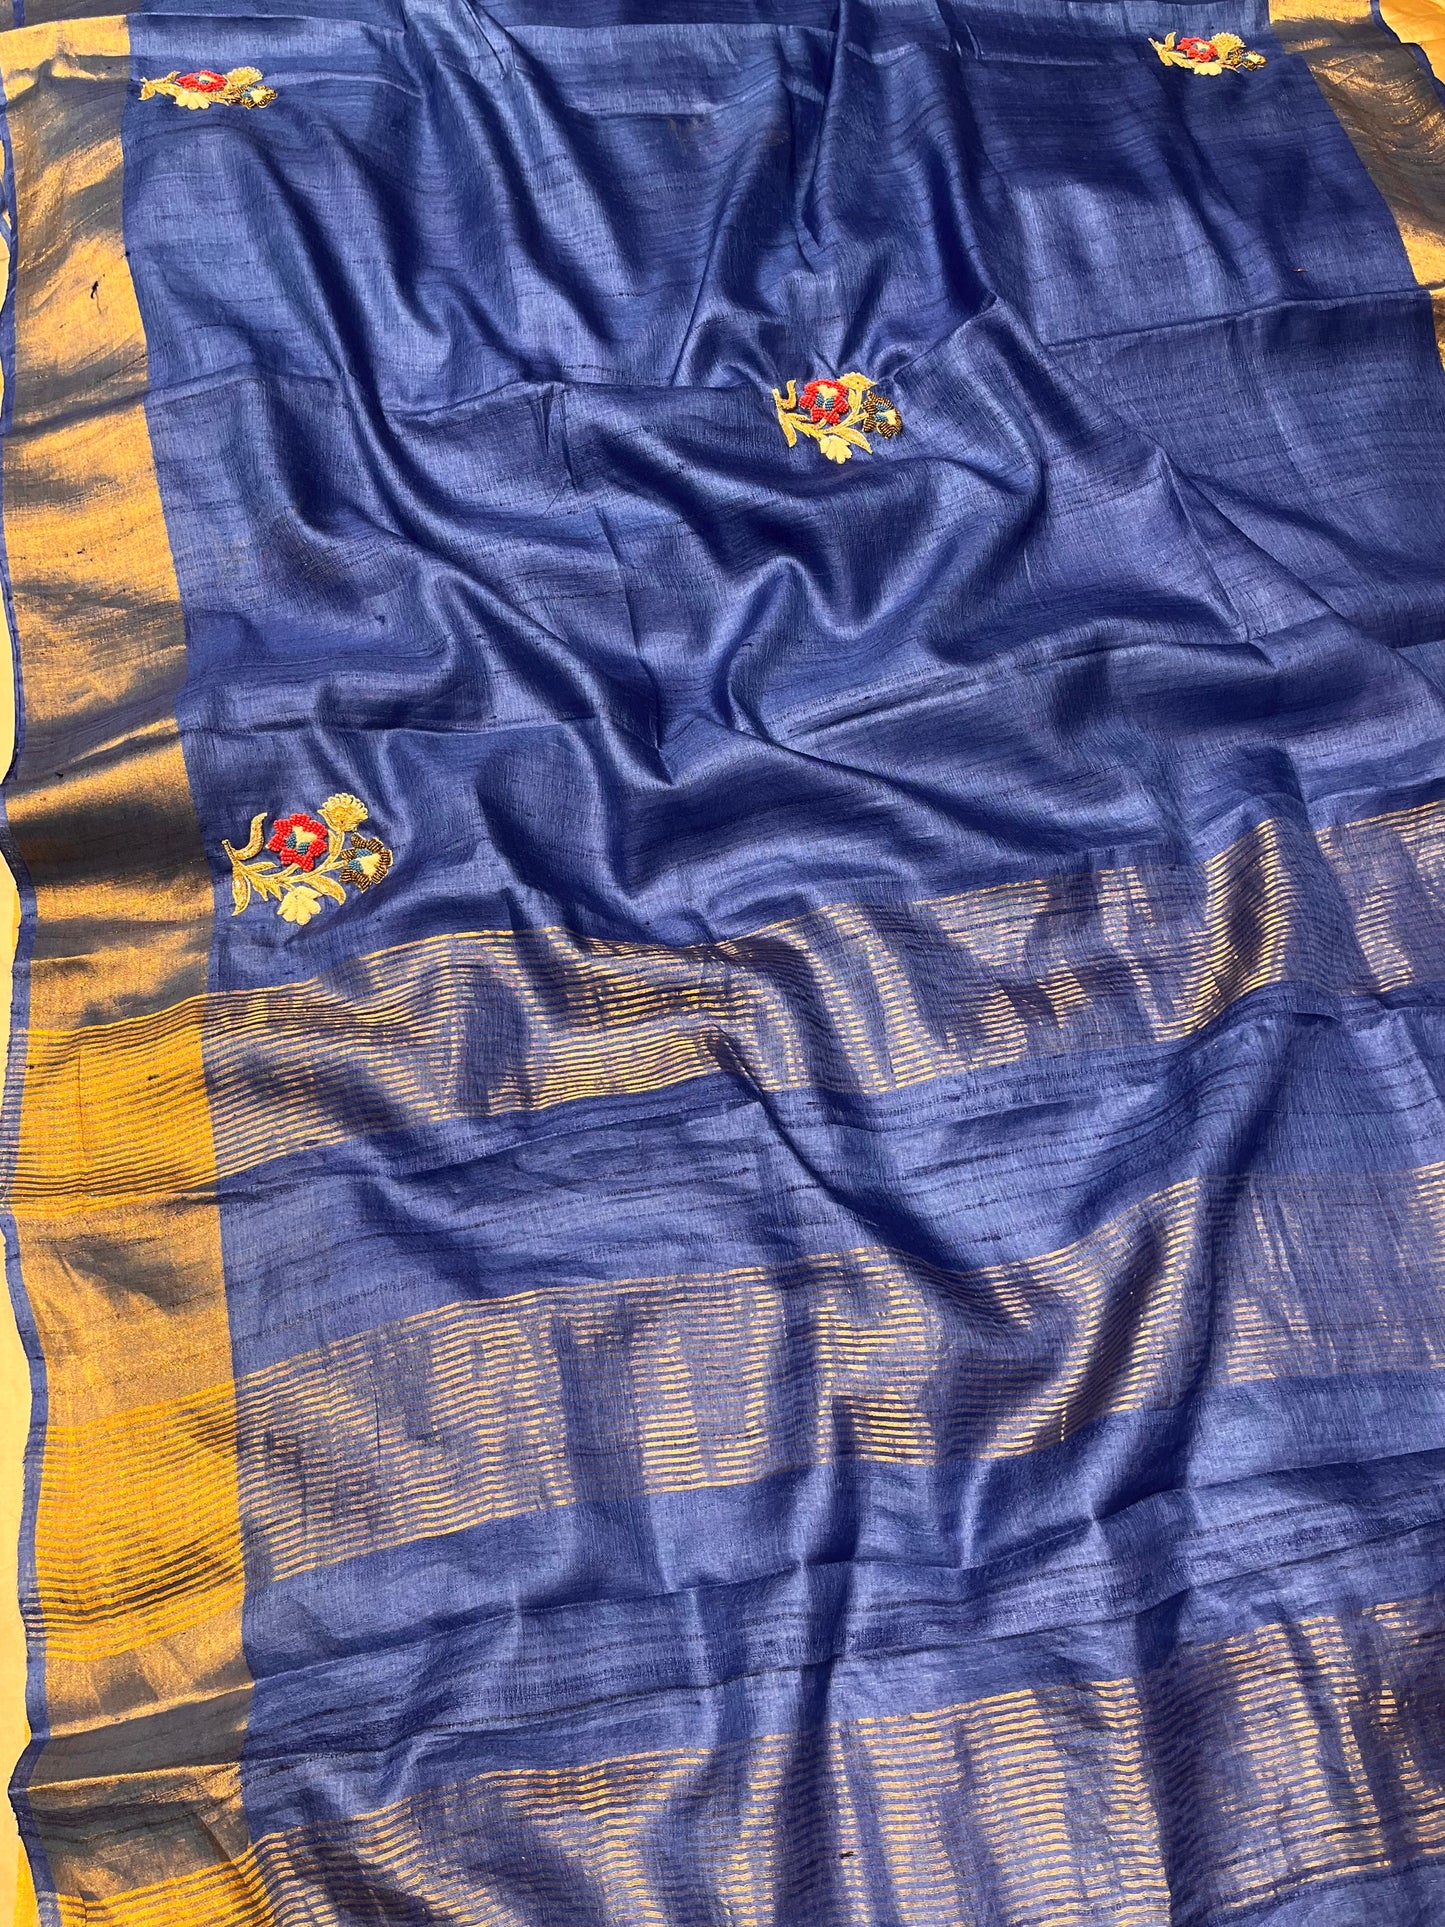 BLUE COLOUR TUSSAR SILK HAND EMBROIDERED SAREE EMBELLISHED WITH CUTDANA, BEADS & ZARDOZI WORK